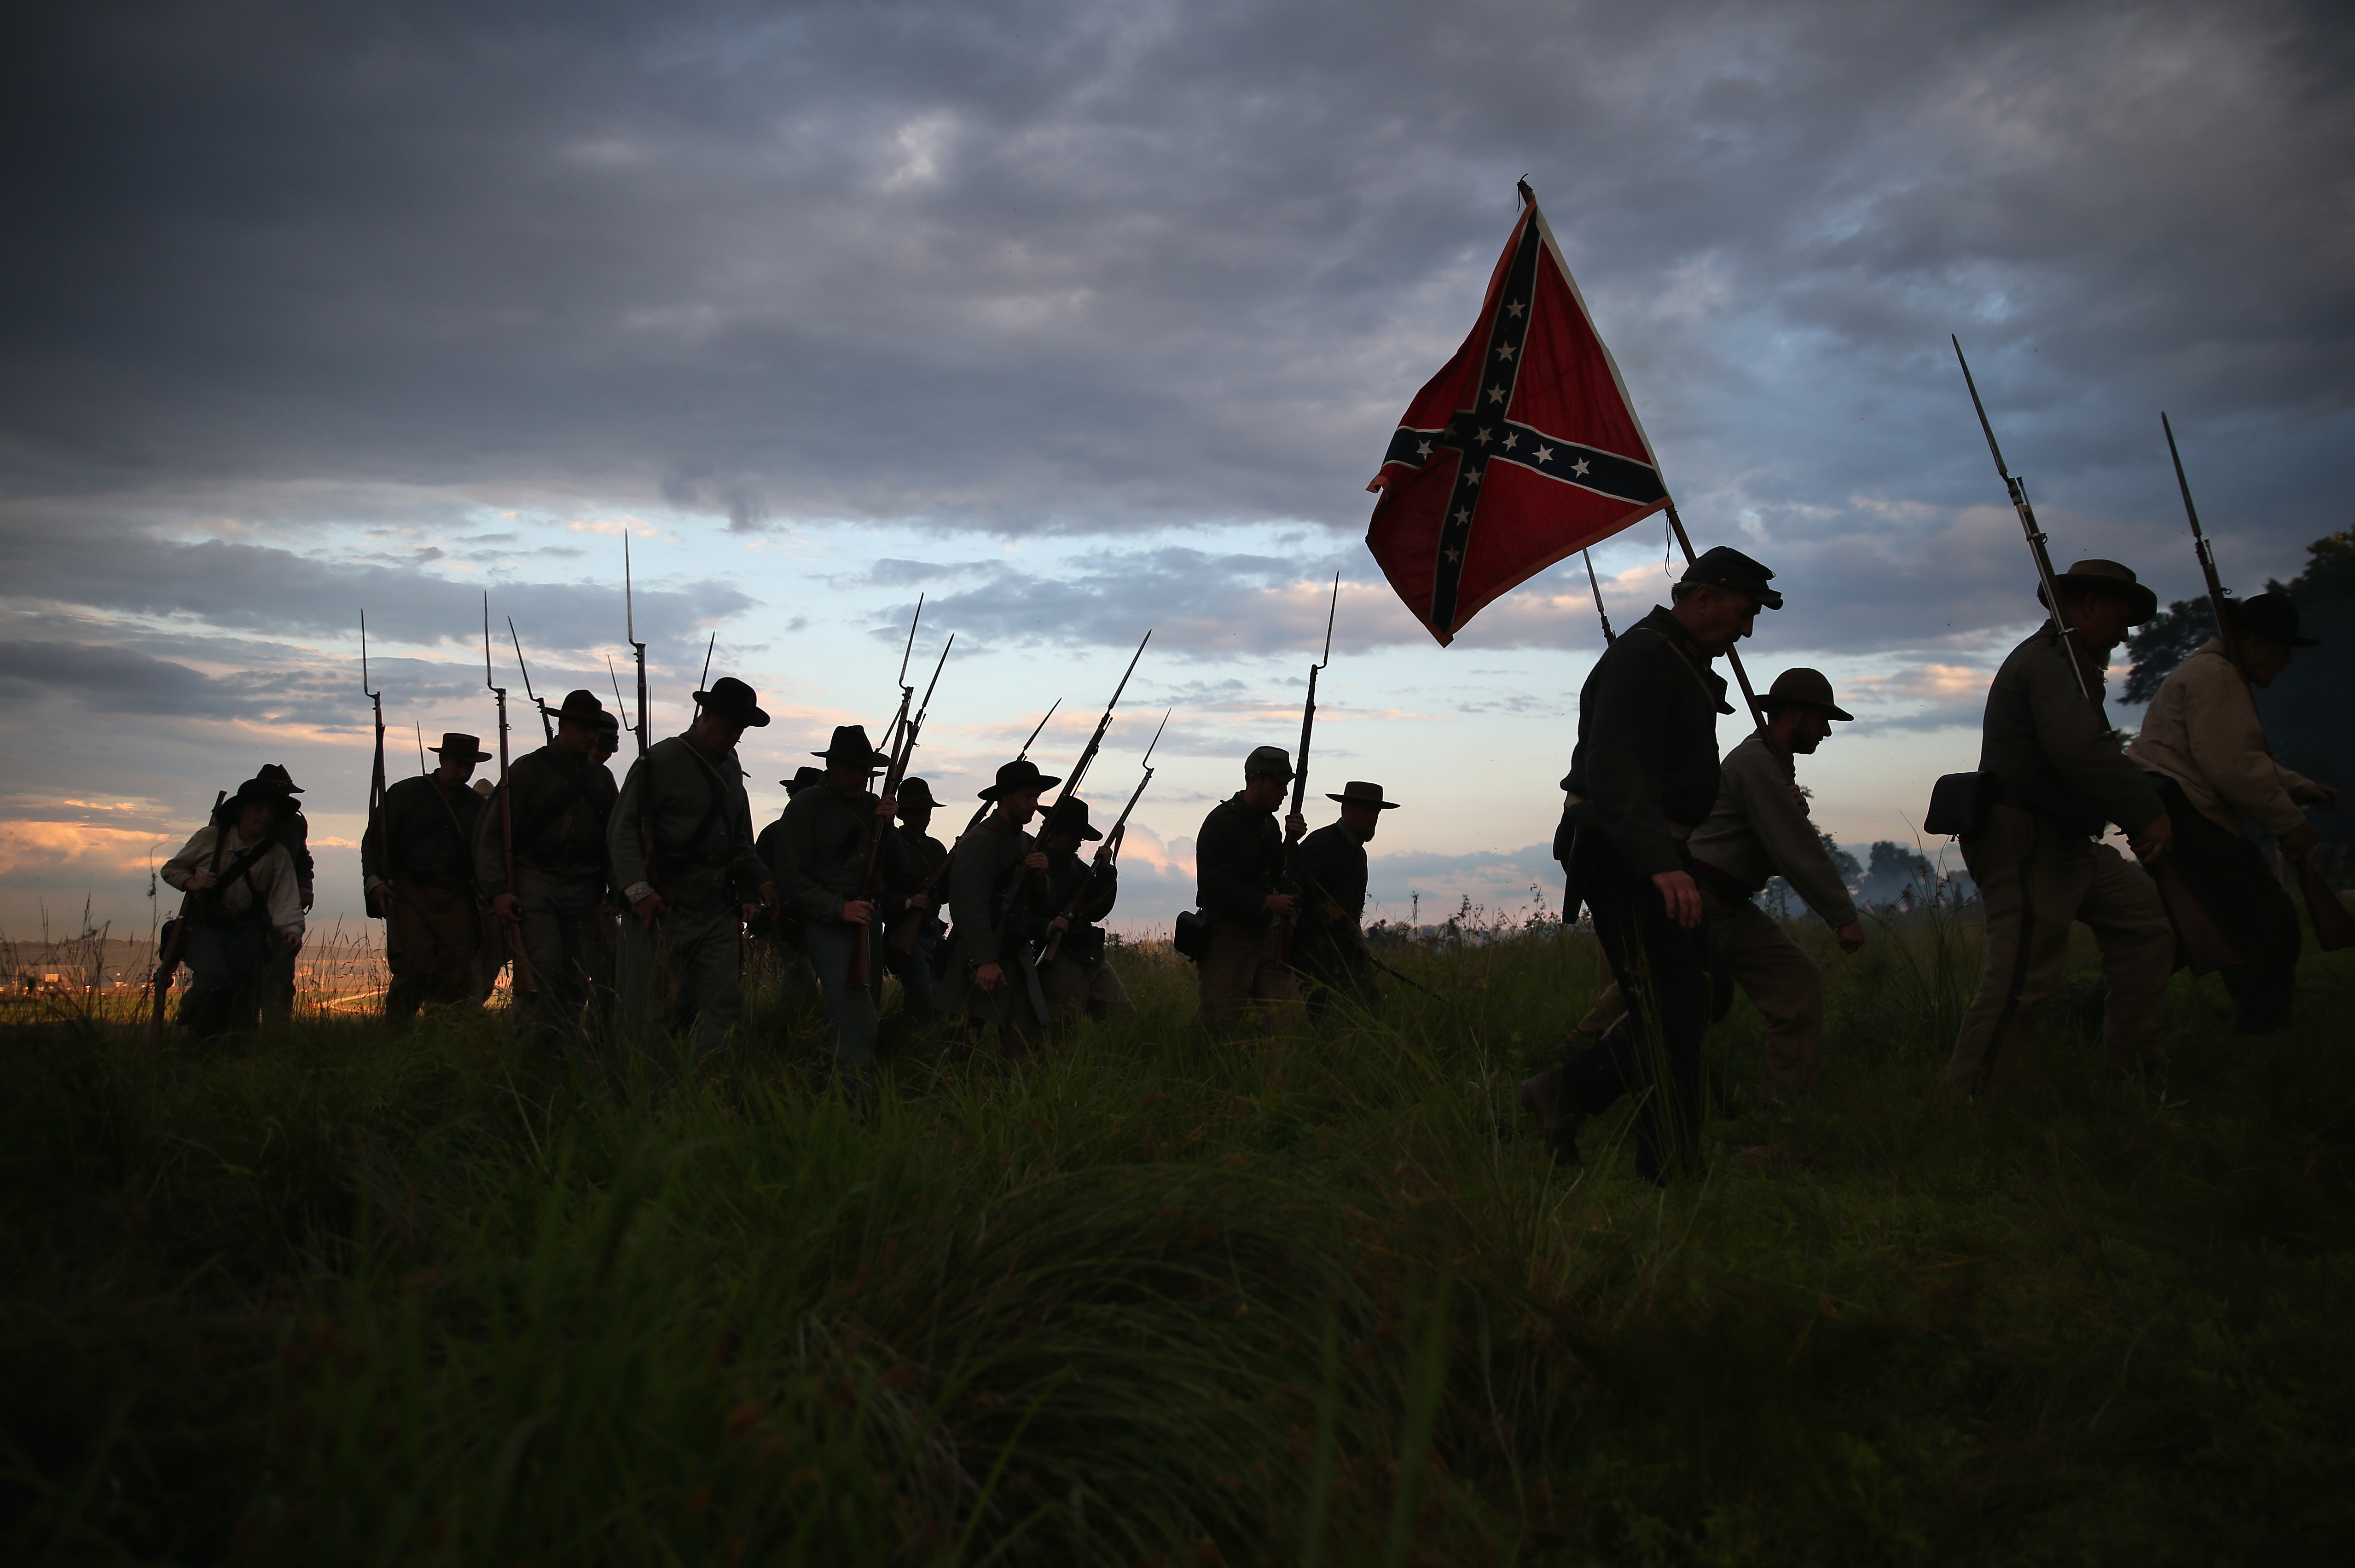 GETTYSBURG, PA - JUNE 29: Confederate Civil War re-enactors march for an evening attack during a three-day Battle of Gettysburg re-enactment on June 29, 2013 in Gettysburg, Pennsylvania. Some 8,000 re-enactors from the Blue Gray Alliance are participating in events marking the 150th anniversary of the July 1-3, 1863 Battle of Gettysburg, considered the turning point in the American Civil War. Union and Confederate armies suffered a combined total of some 46,000-51,000 casualties in the battle, the highest of any conflict of the war. (Photo by John Moore/Getty Images)